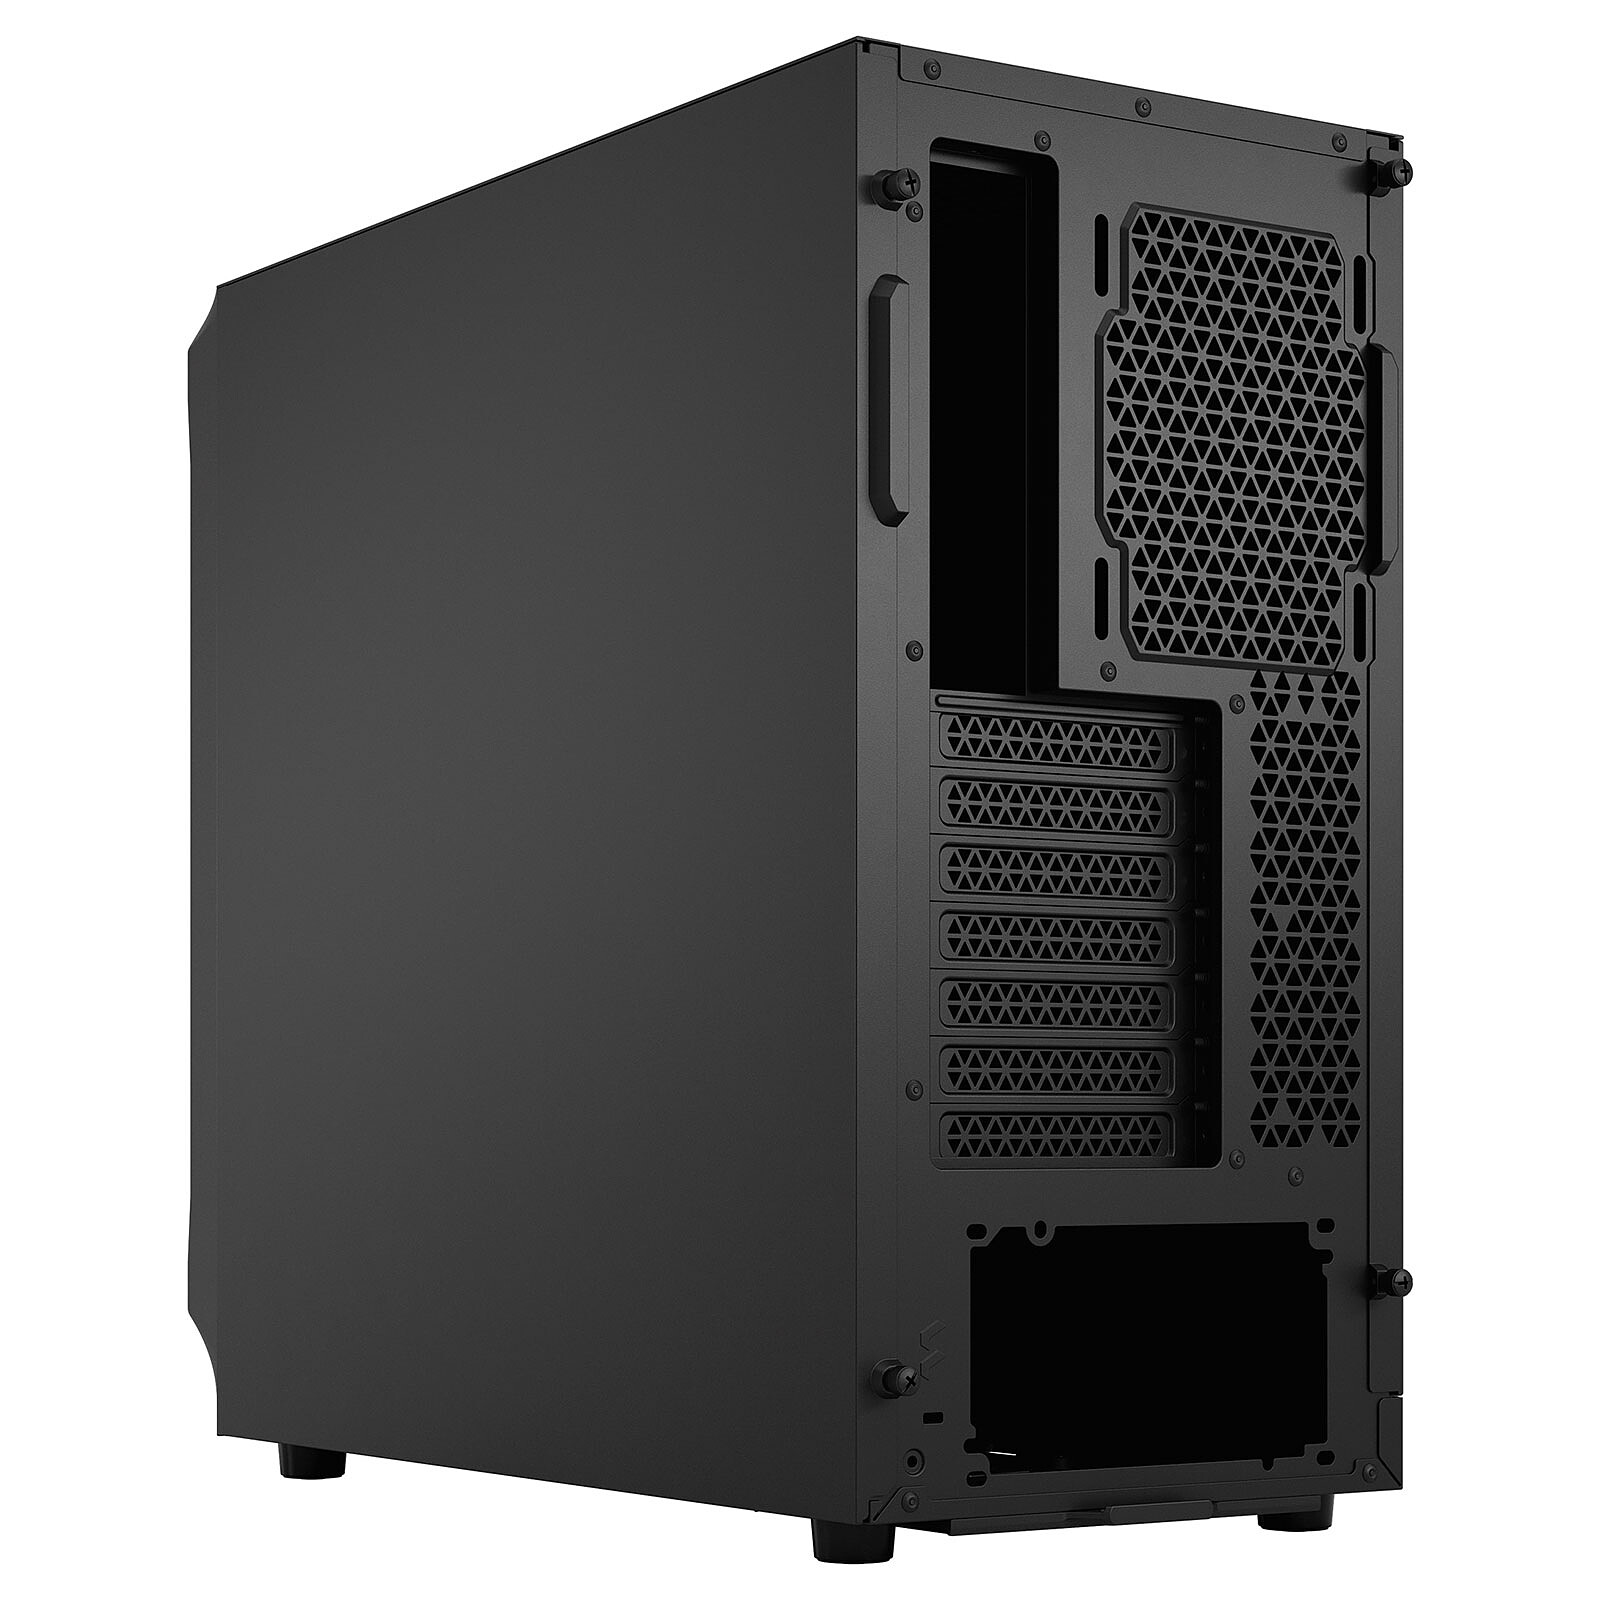 Buy Fractal Design Focus 2 RGB  Tempered Glass Mid Tower Case at